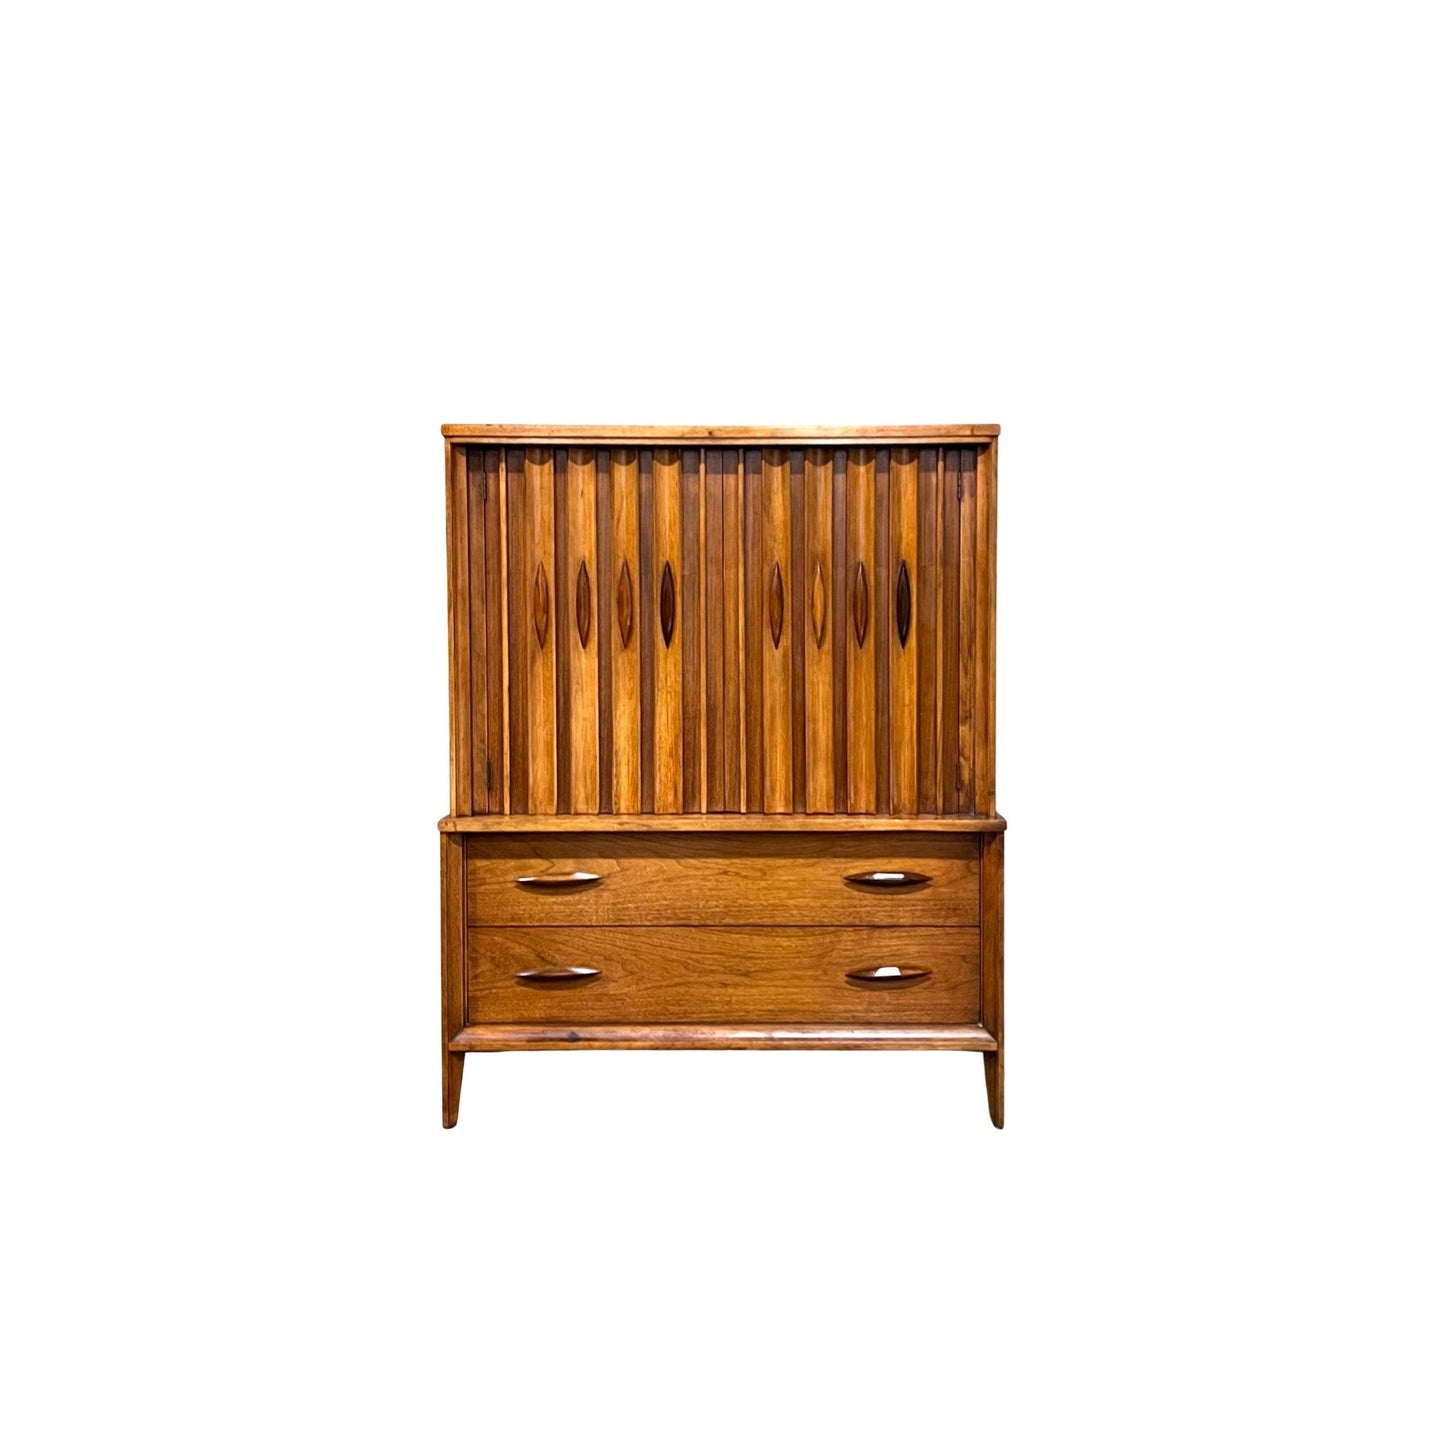 Vintage Thomasville mid-century modern gentleman's chest with exquisite walnut wood and rosewood embellishments